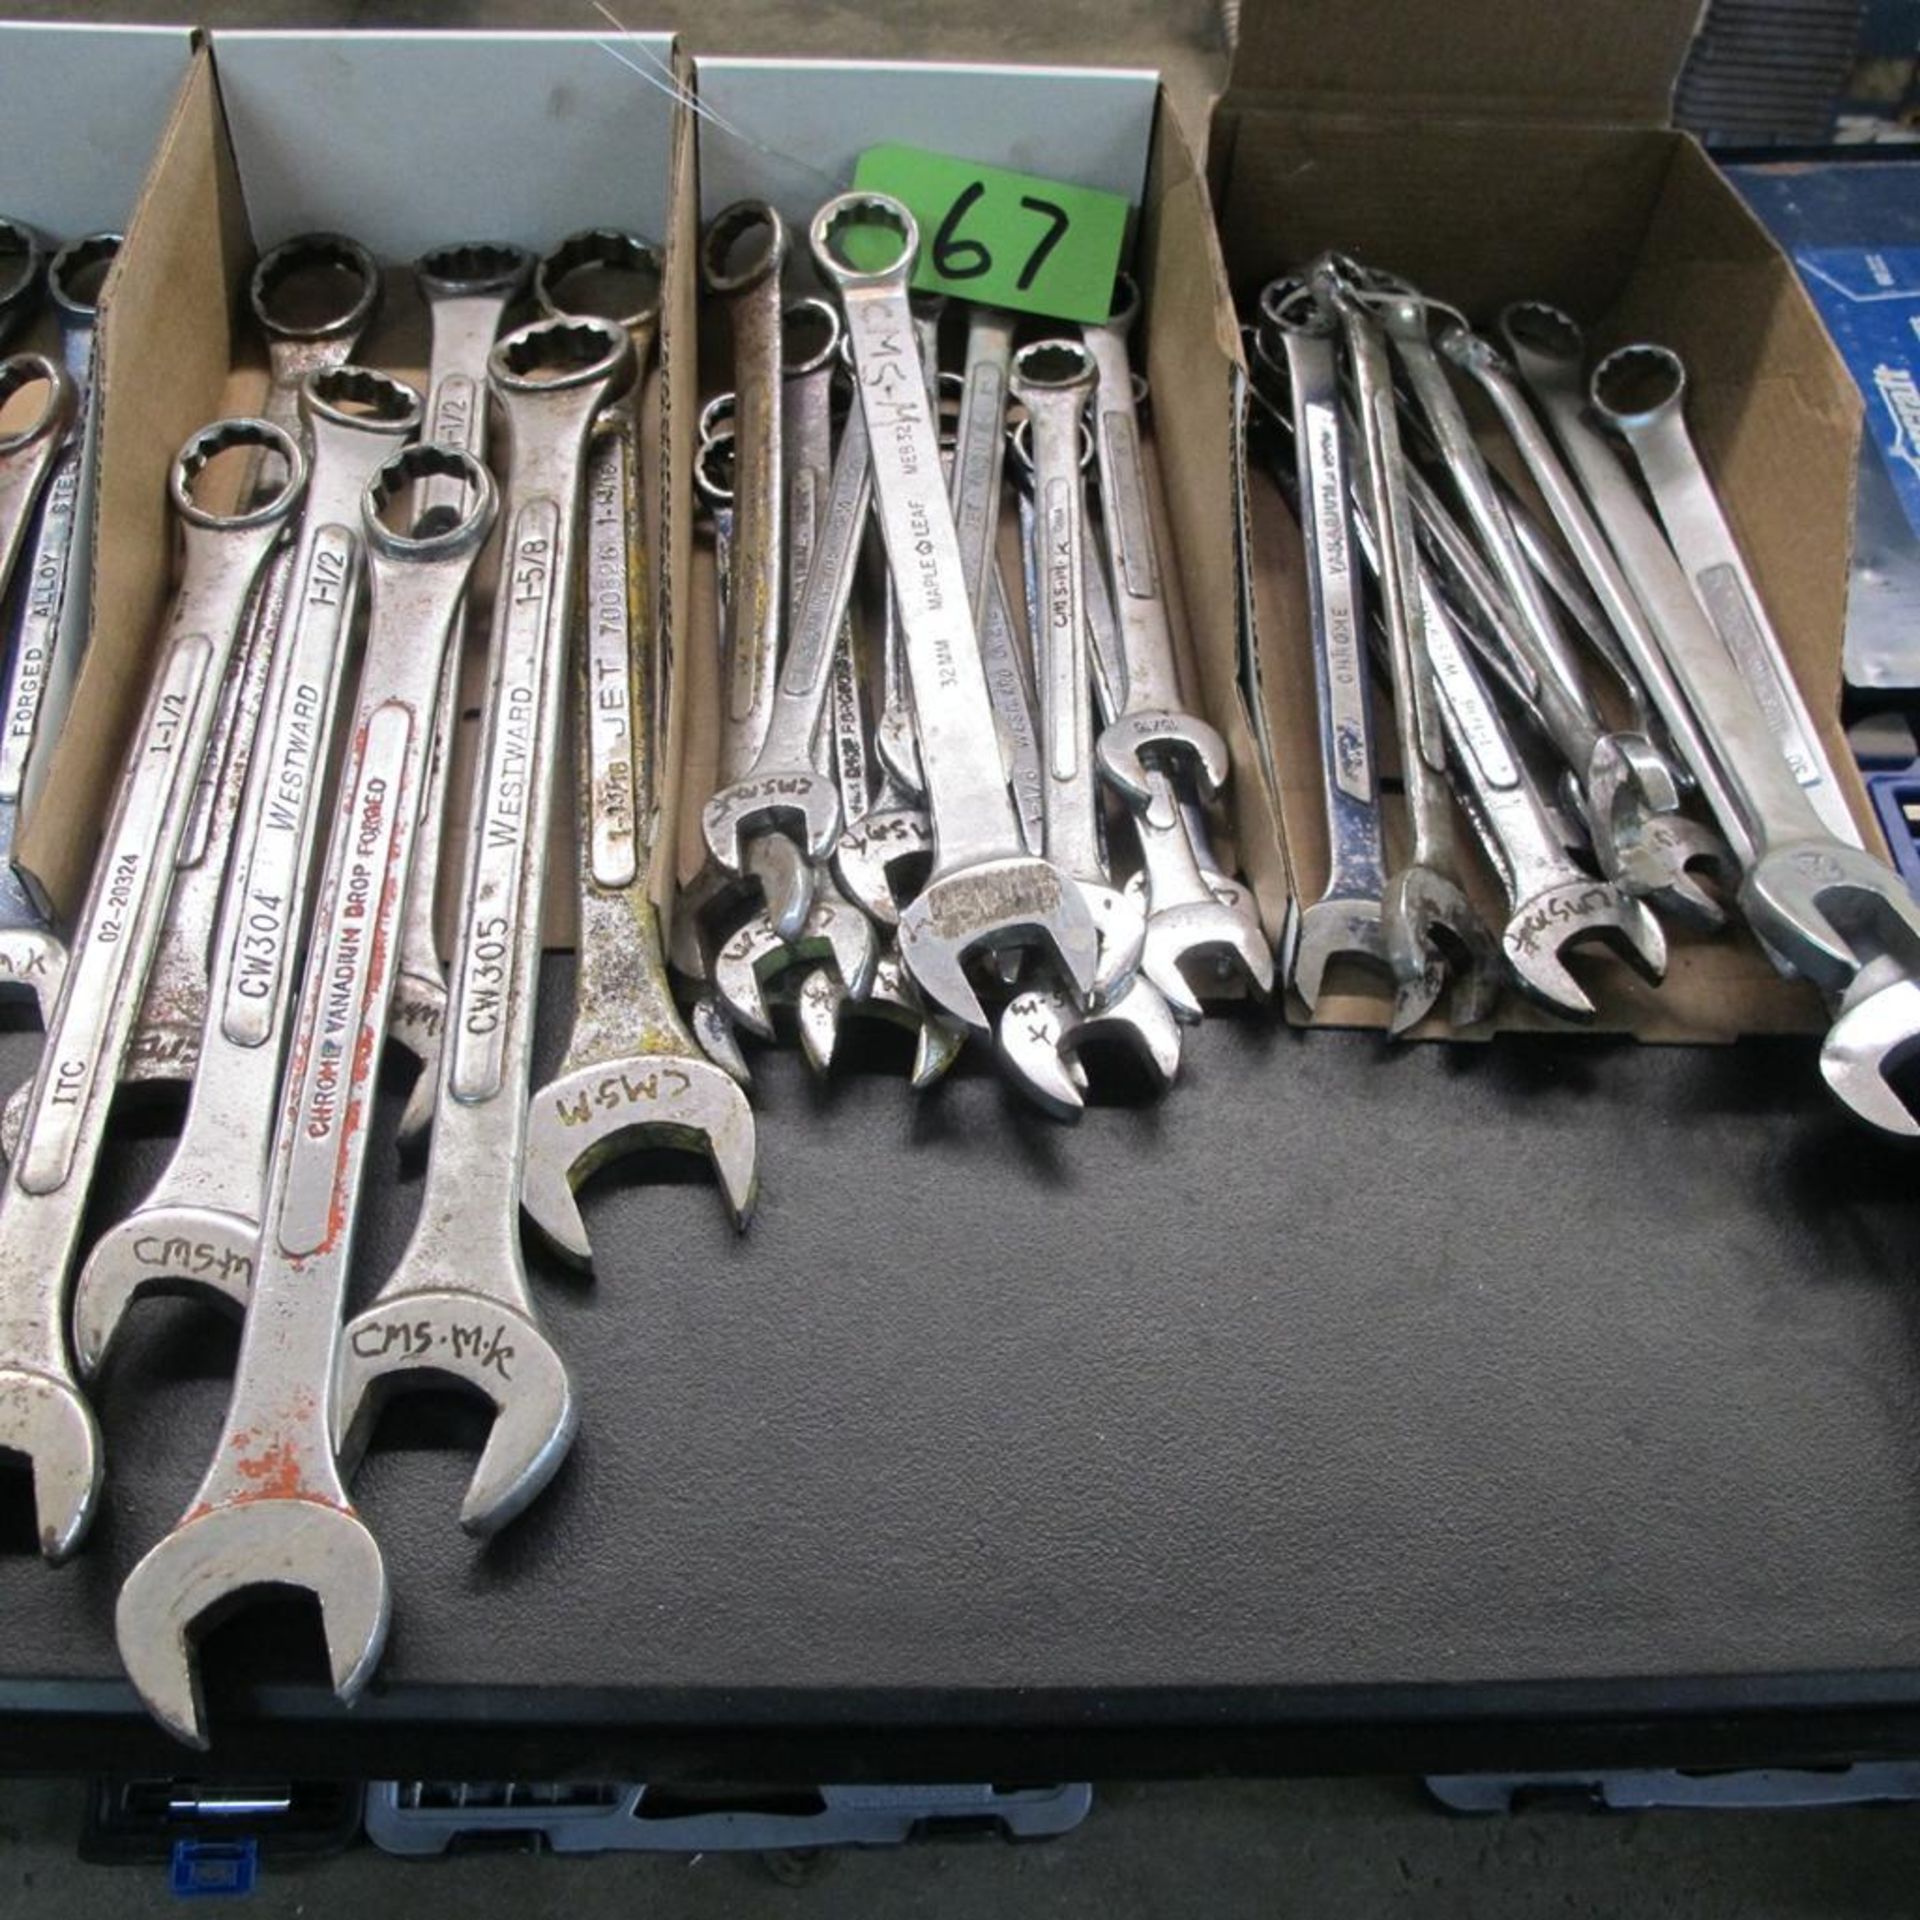 LOT OF 3 BOXES OF LARGE HAND WRENCHES (IN WEST BLDG)